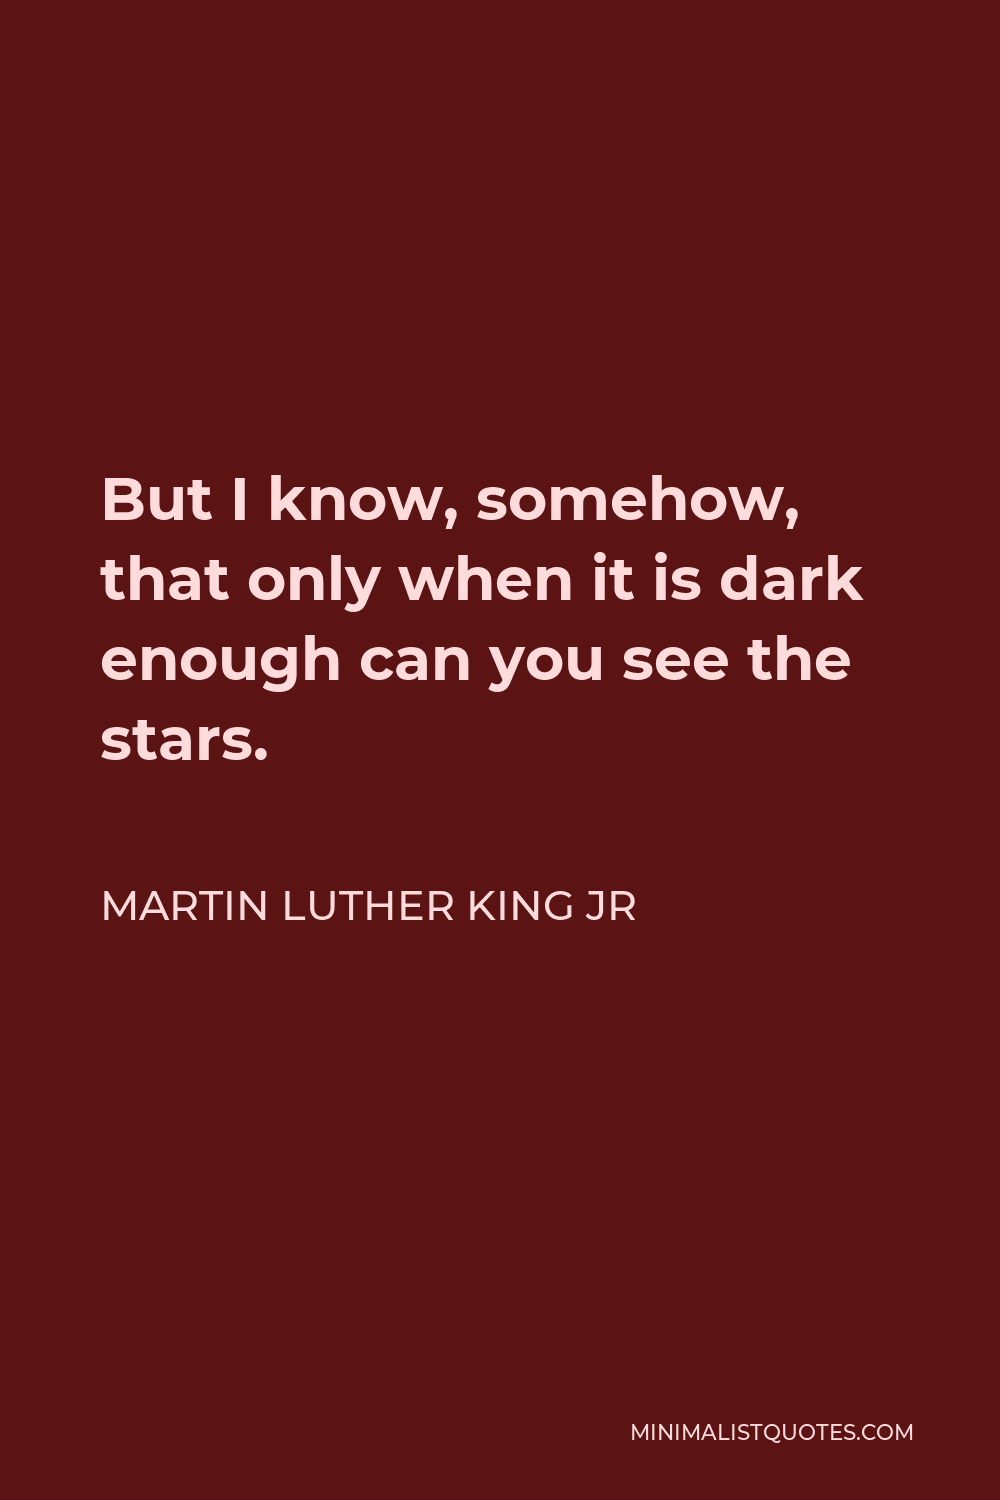 Martin Luther King Jr Quote - But I know, somehow, that only when it is dark enough can you see the stars.